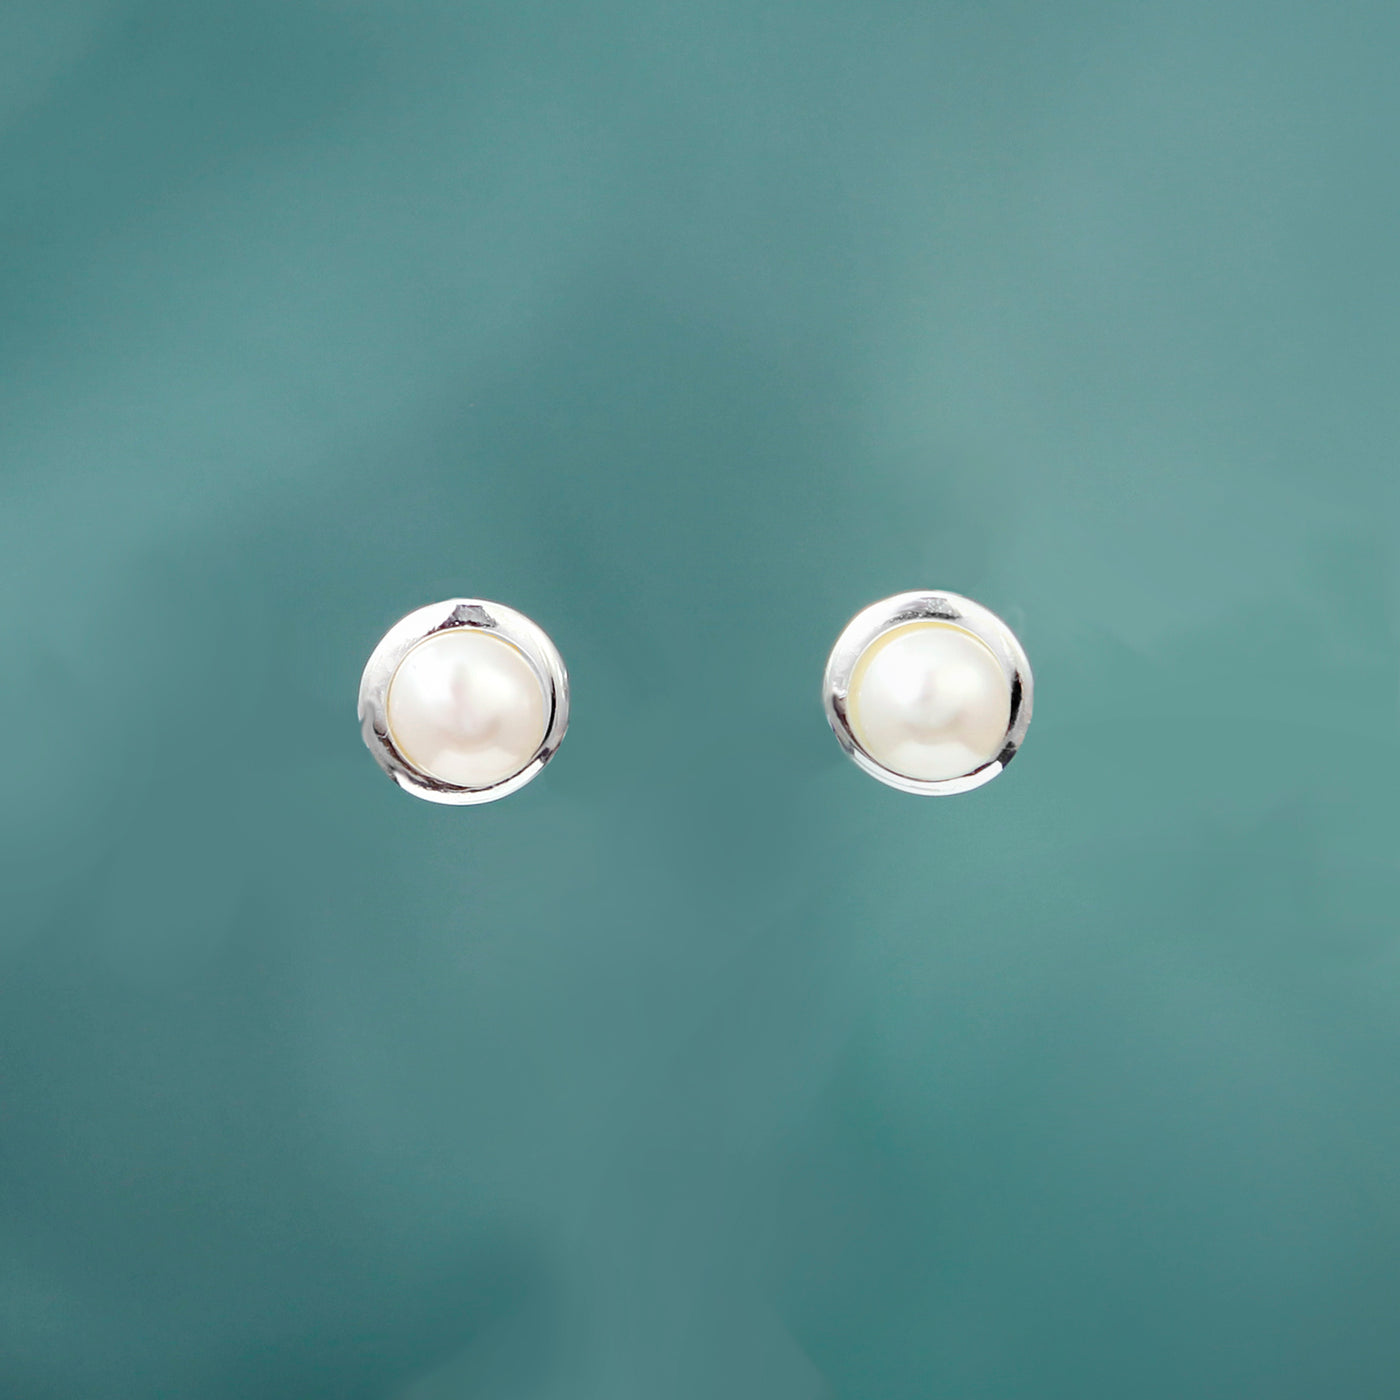 Image of Silver and Pearl Stud Earrings